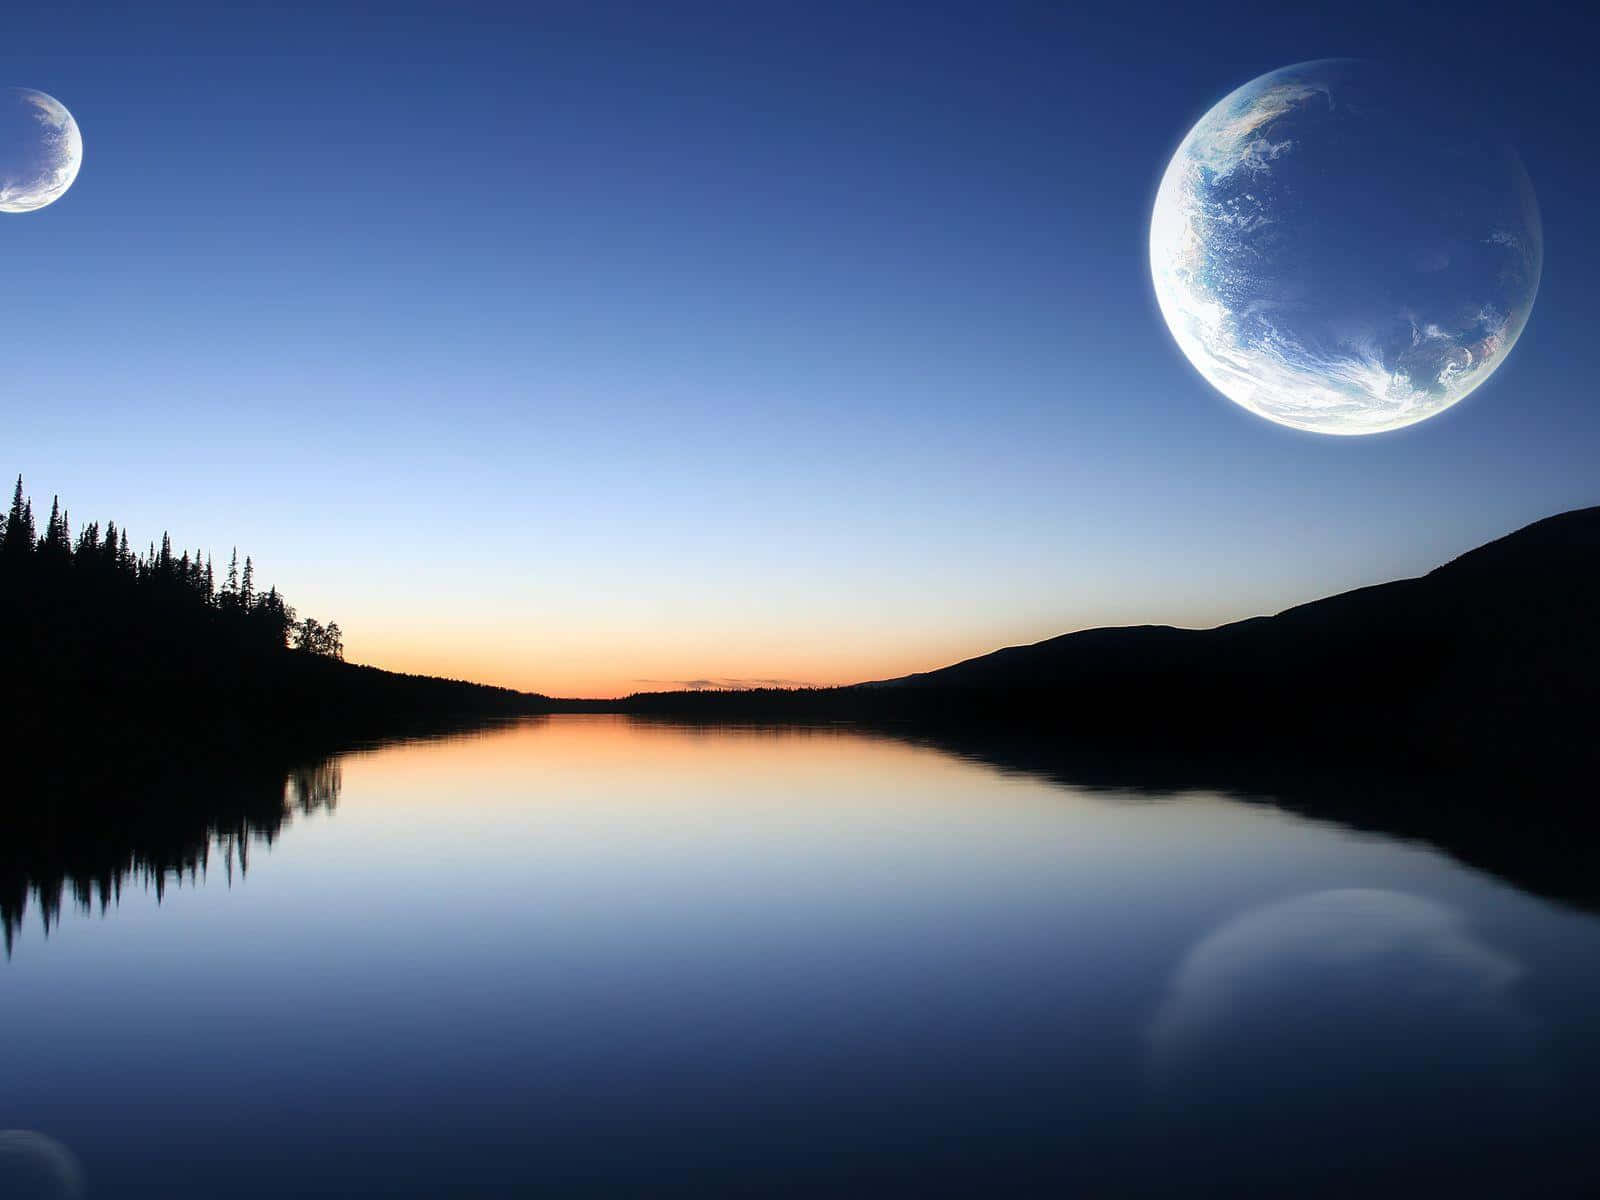 Moon And Planets In The Water Background